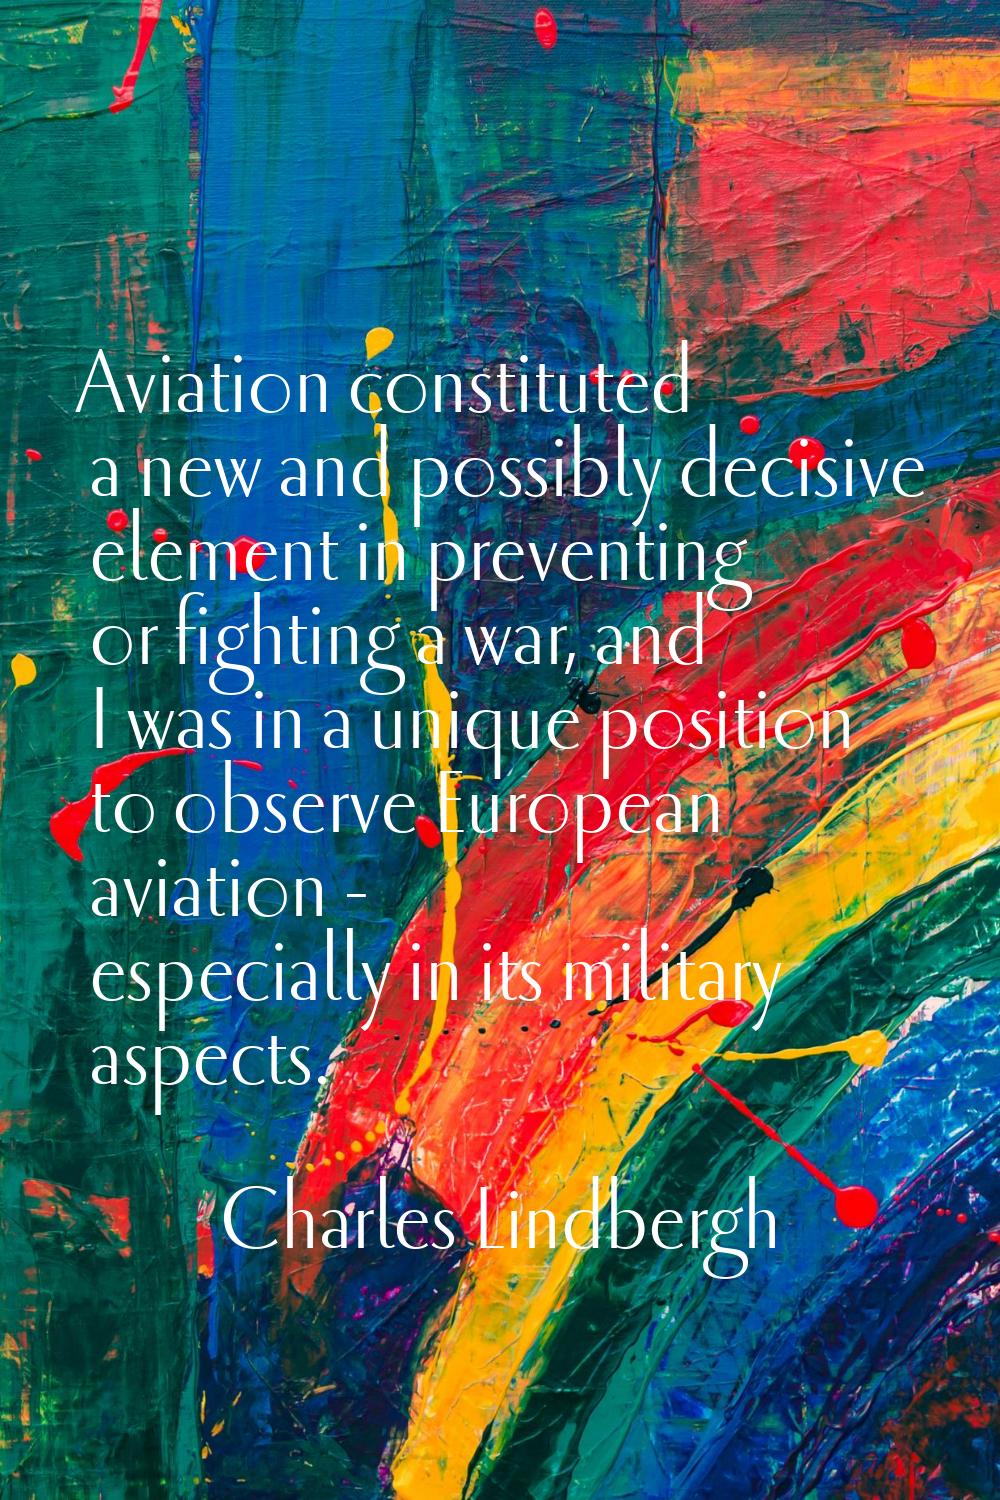 Aviation constituted a new and possibly decisive element in preventing or fighting a war, and I was